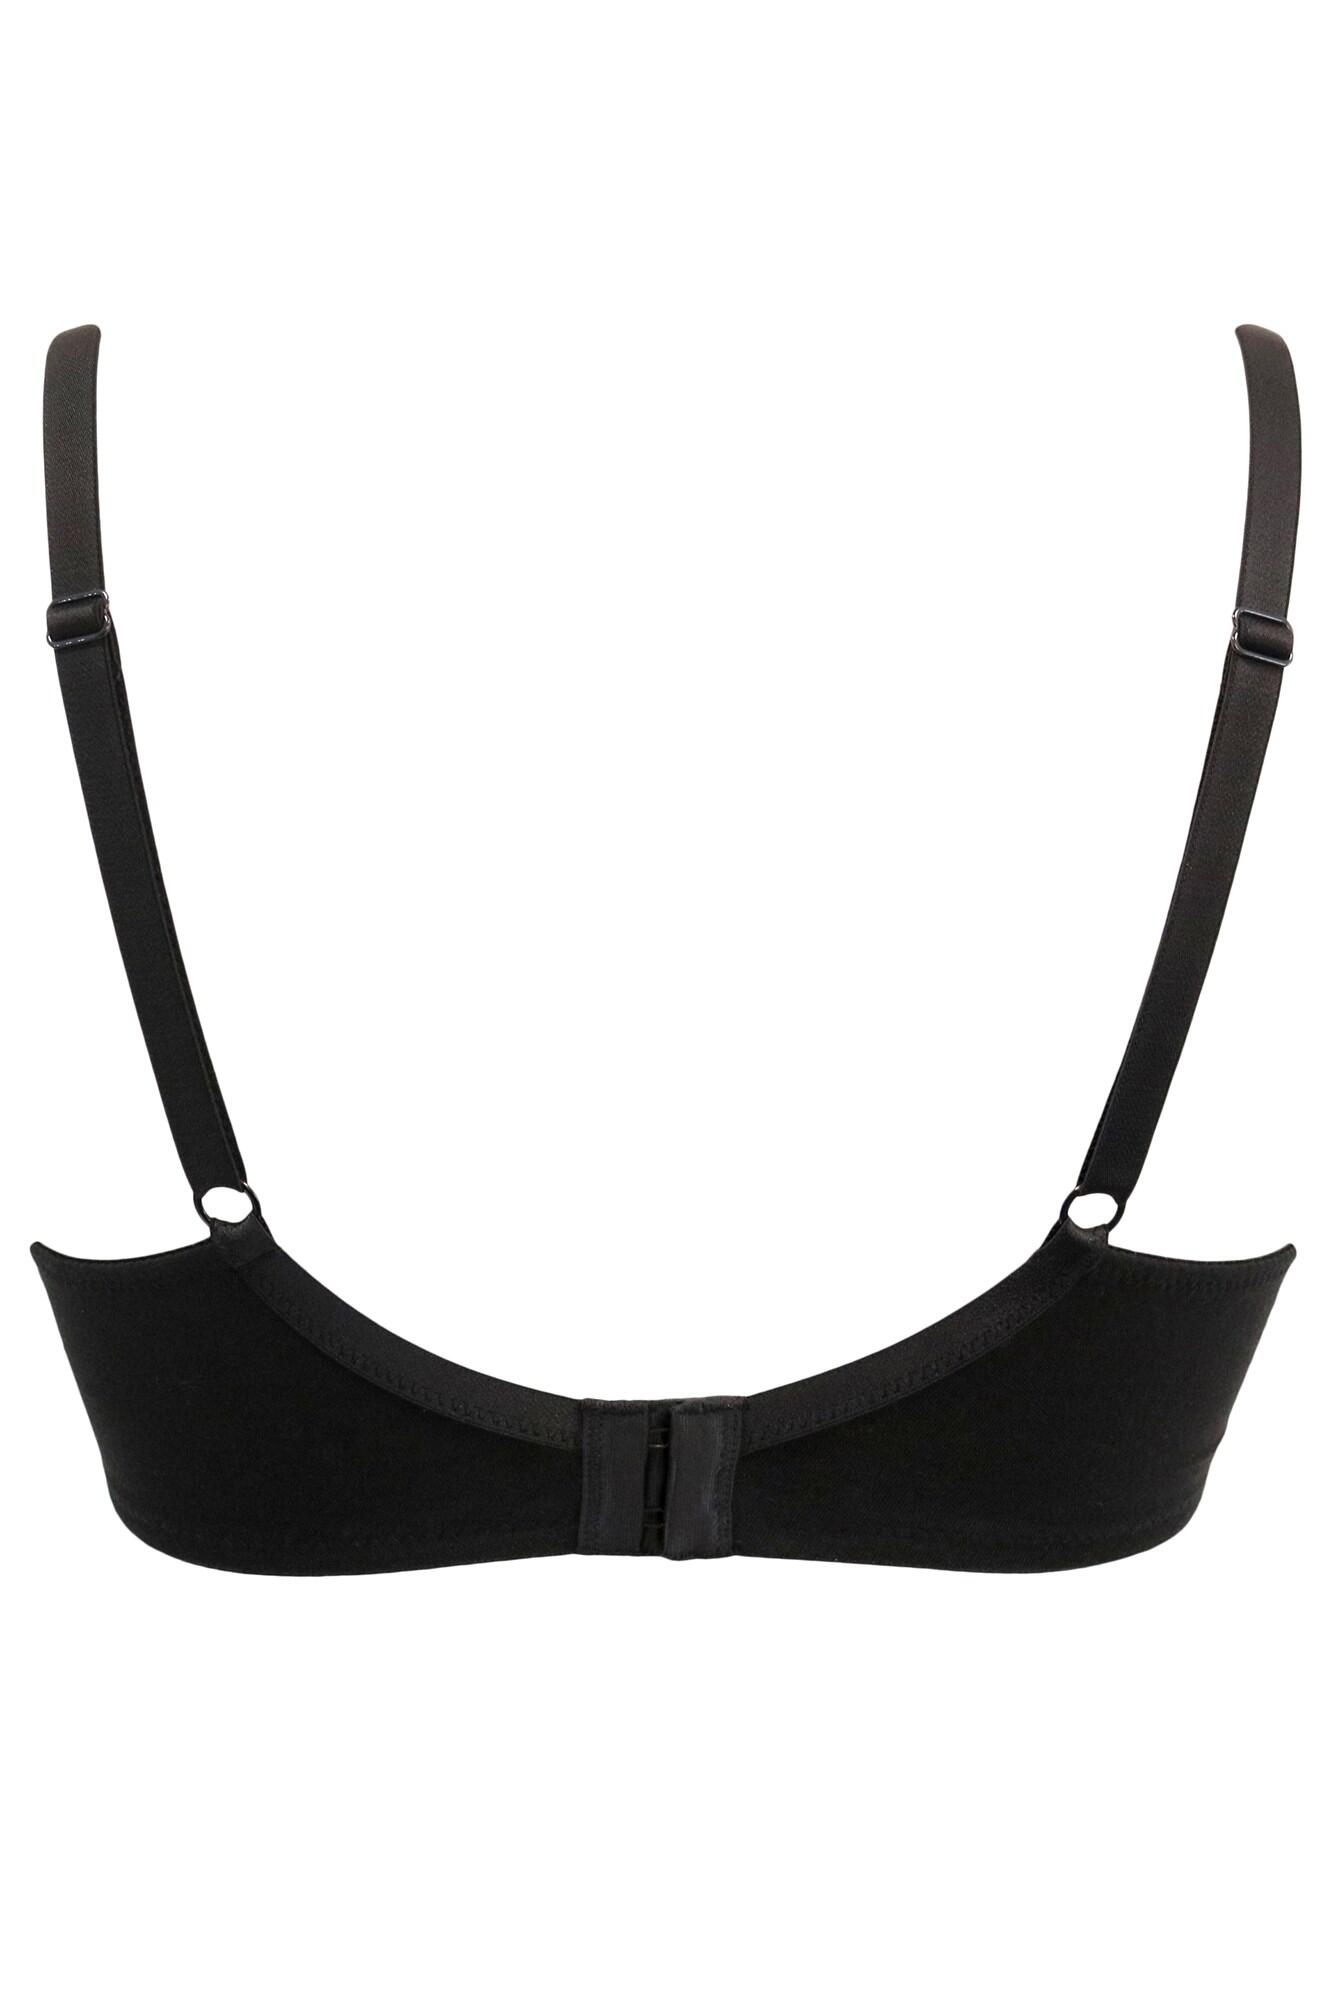 Buy online Black Polyester Tshirt Bra from lingerie for Women by Quttos for  ₹280 at 65% off